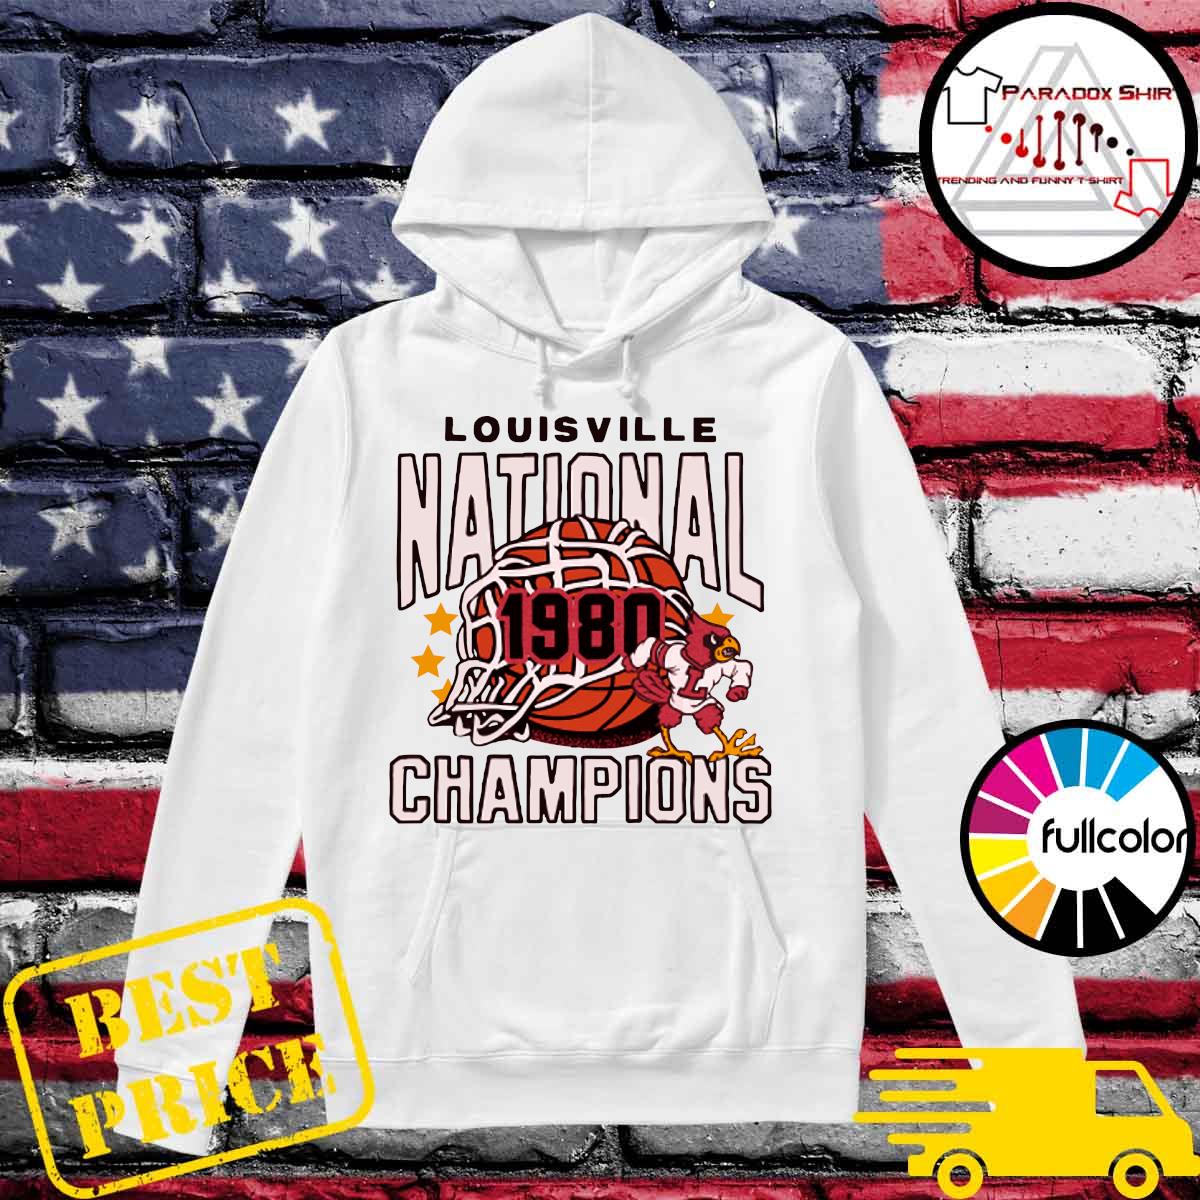 Paradoxshirt – Official Louisville National 1980 Champions Basketball ...